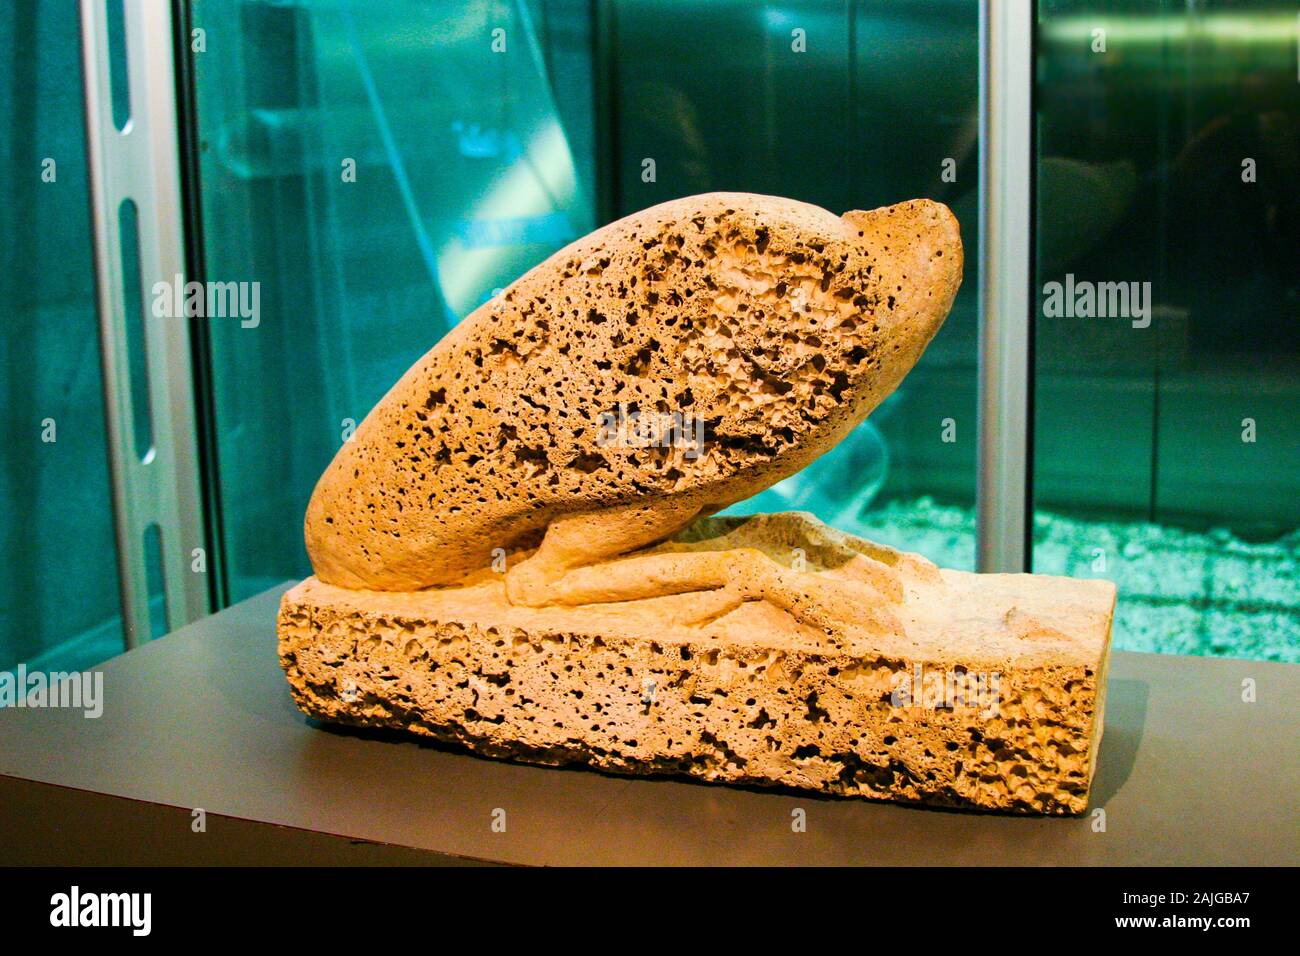 Egypt, Alexandria, Archeological museum of the Bibliotheca Alexandrina, statue of an ibis, corroded by water.  Limestone. Stock Photo